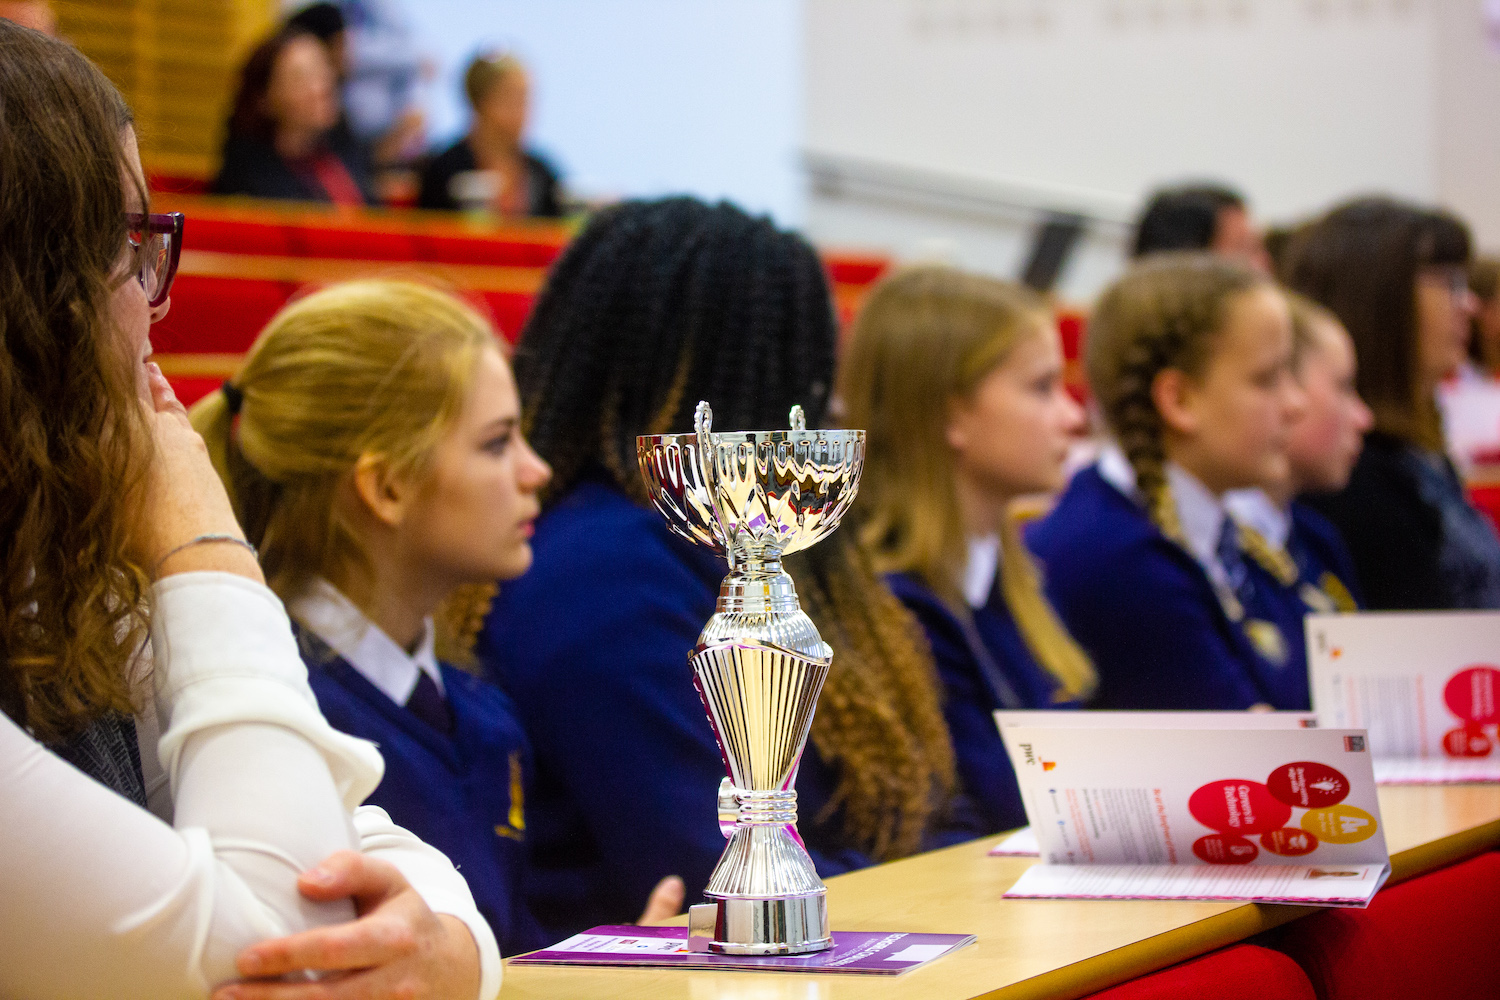 Professional Photography Silver Trophy With Female Students Wearing Blue Sweatshirts In Row Watching Event